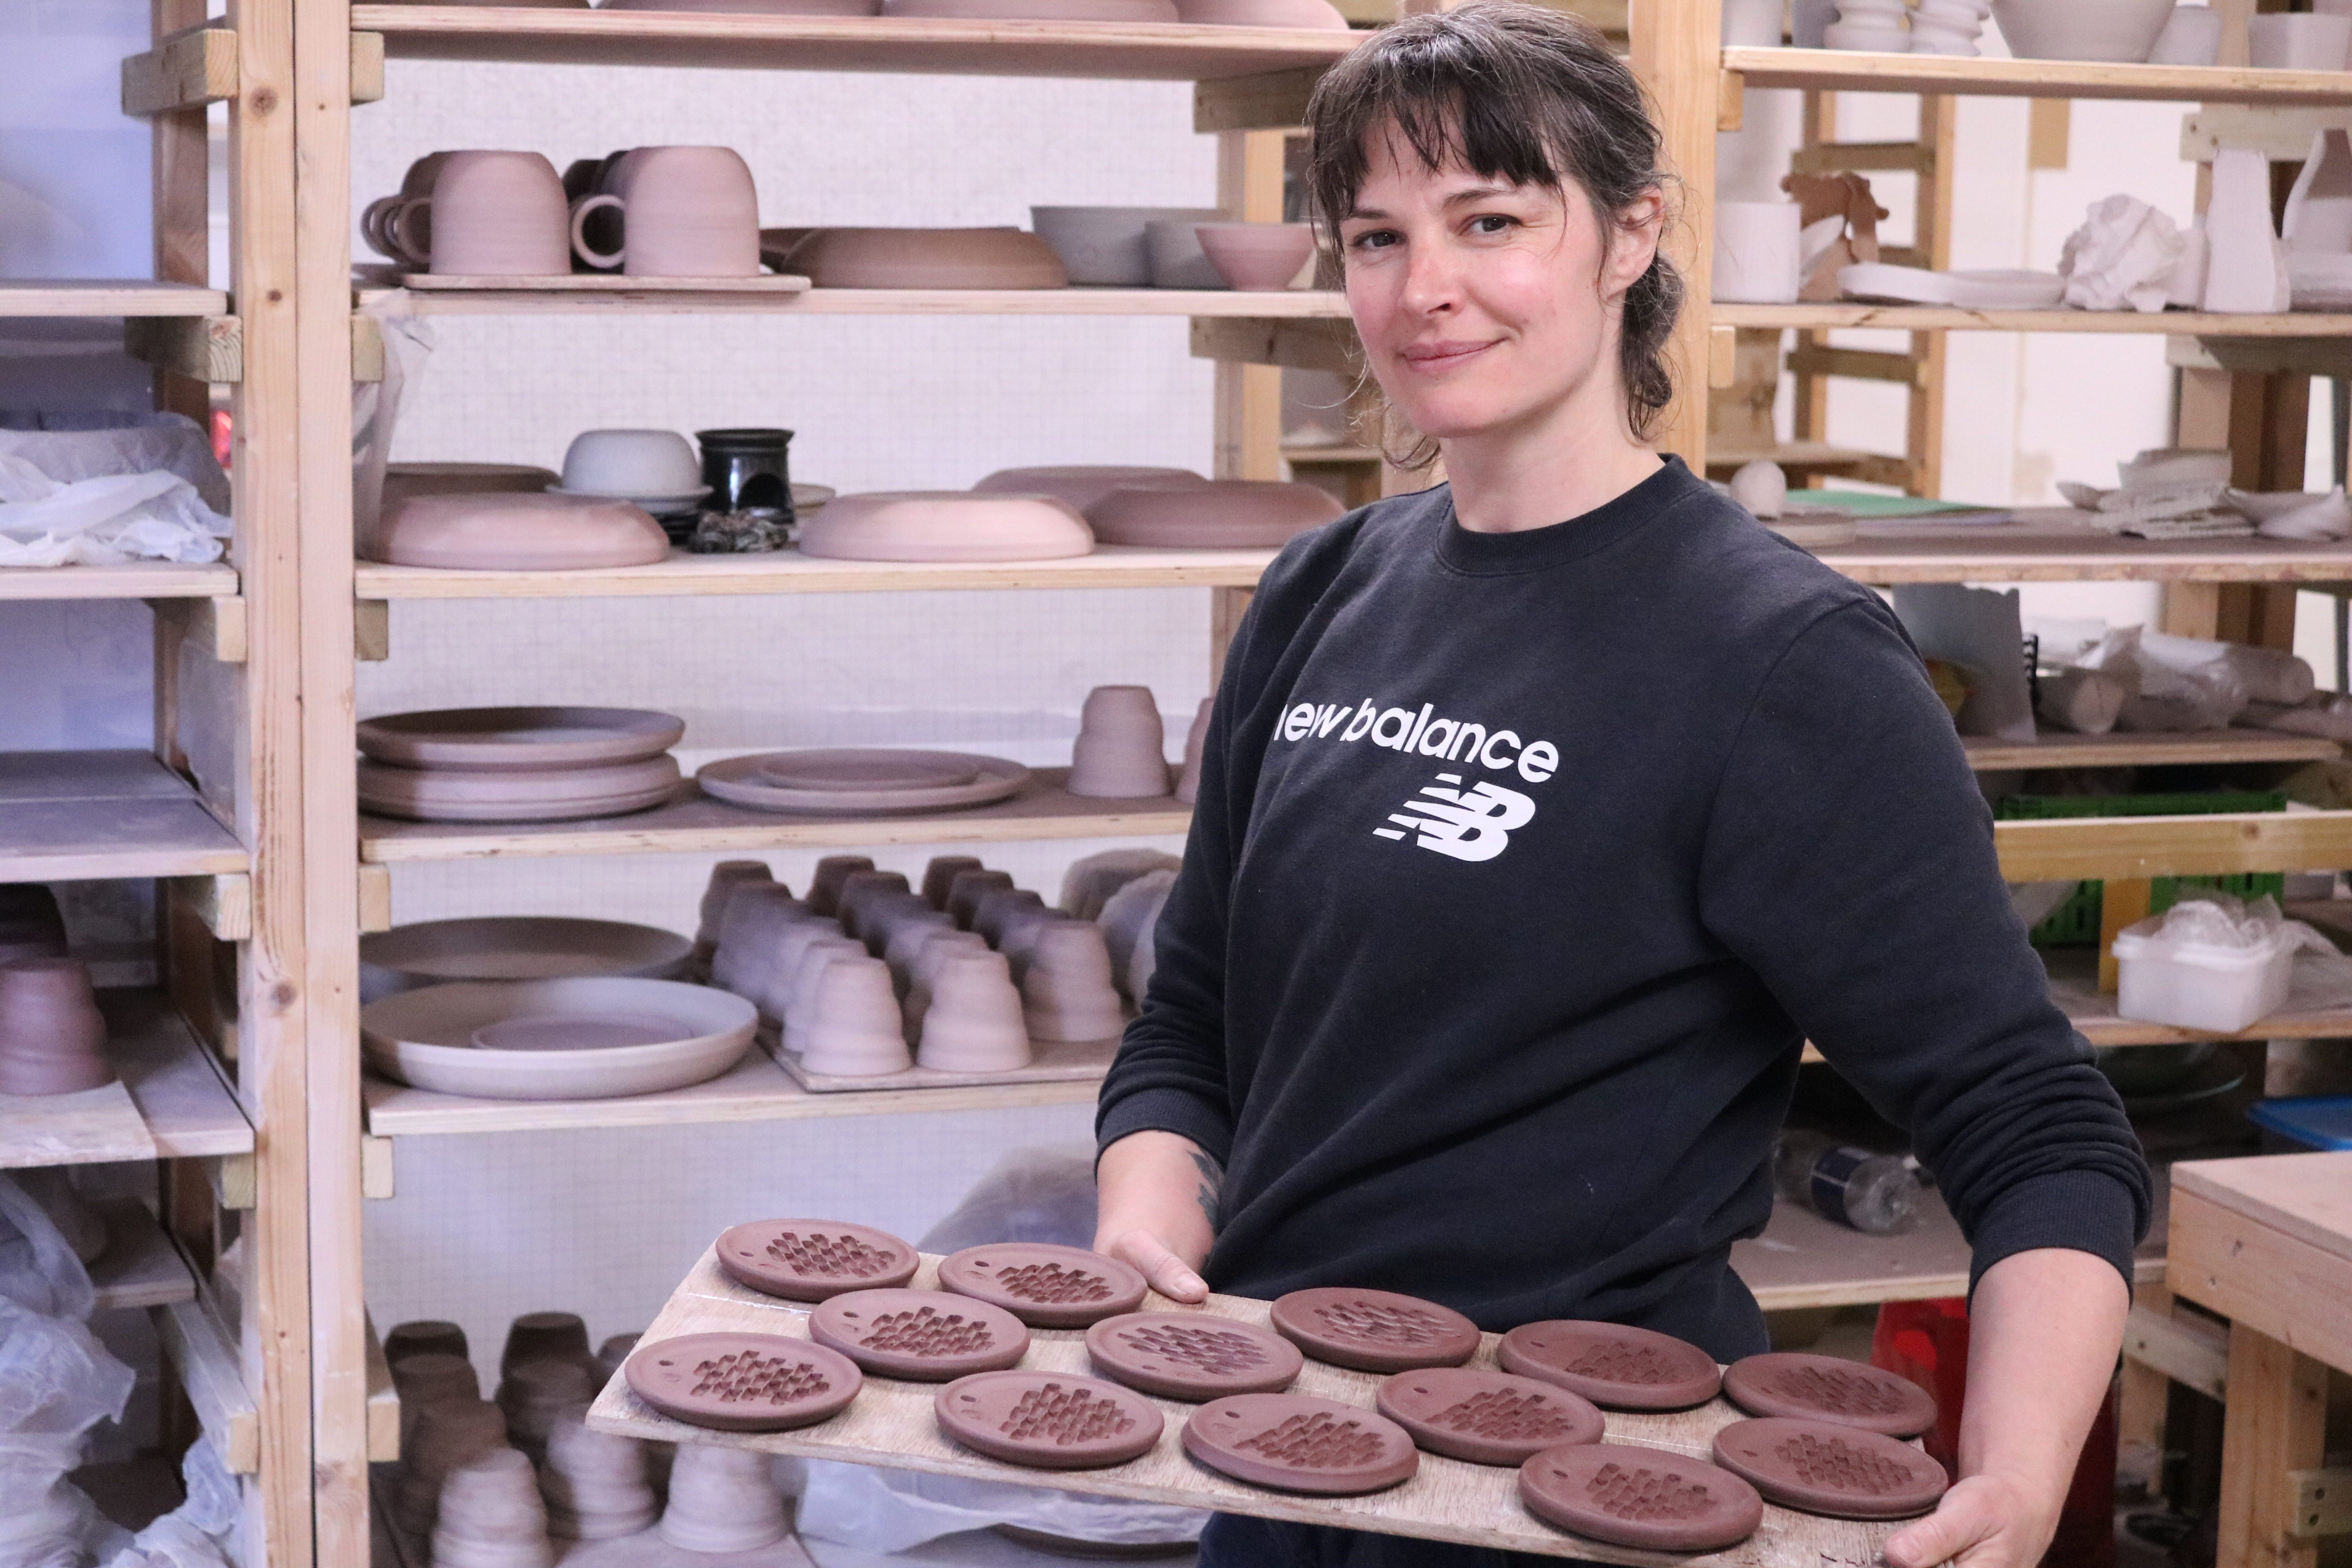 A woman with brown hair, holding a tray of unfired ceramics